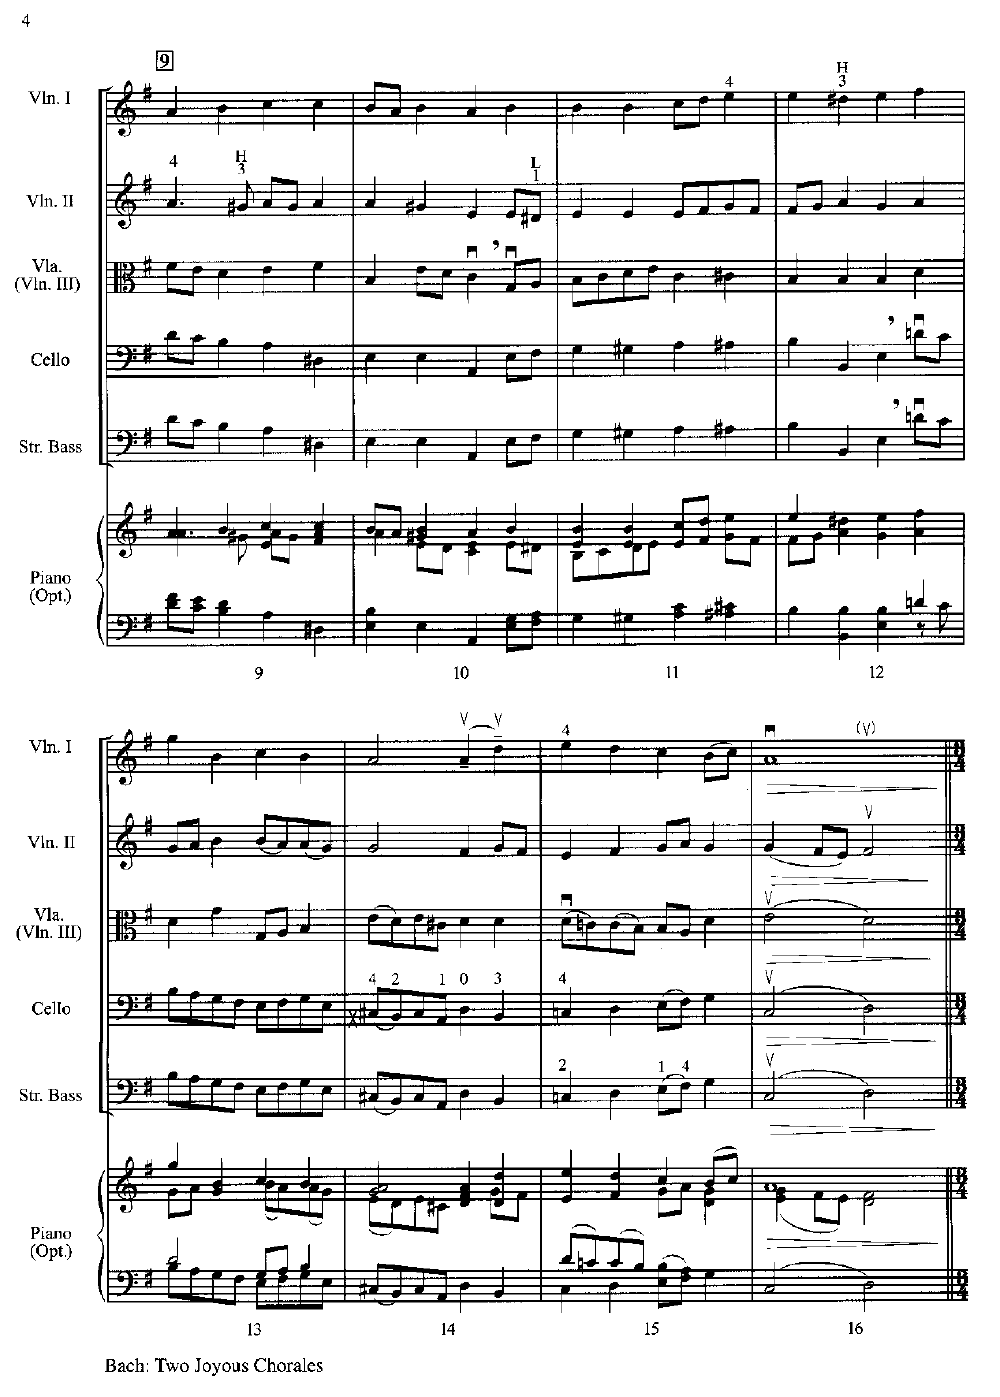 BACH TWO JOYOUS CHORALES